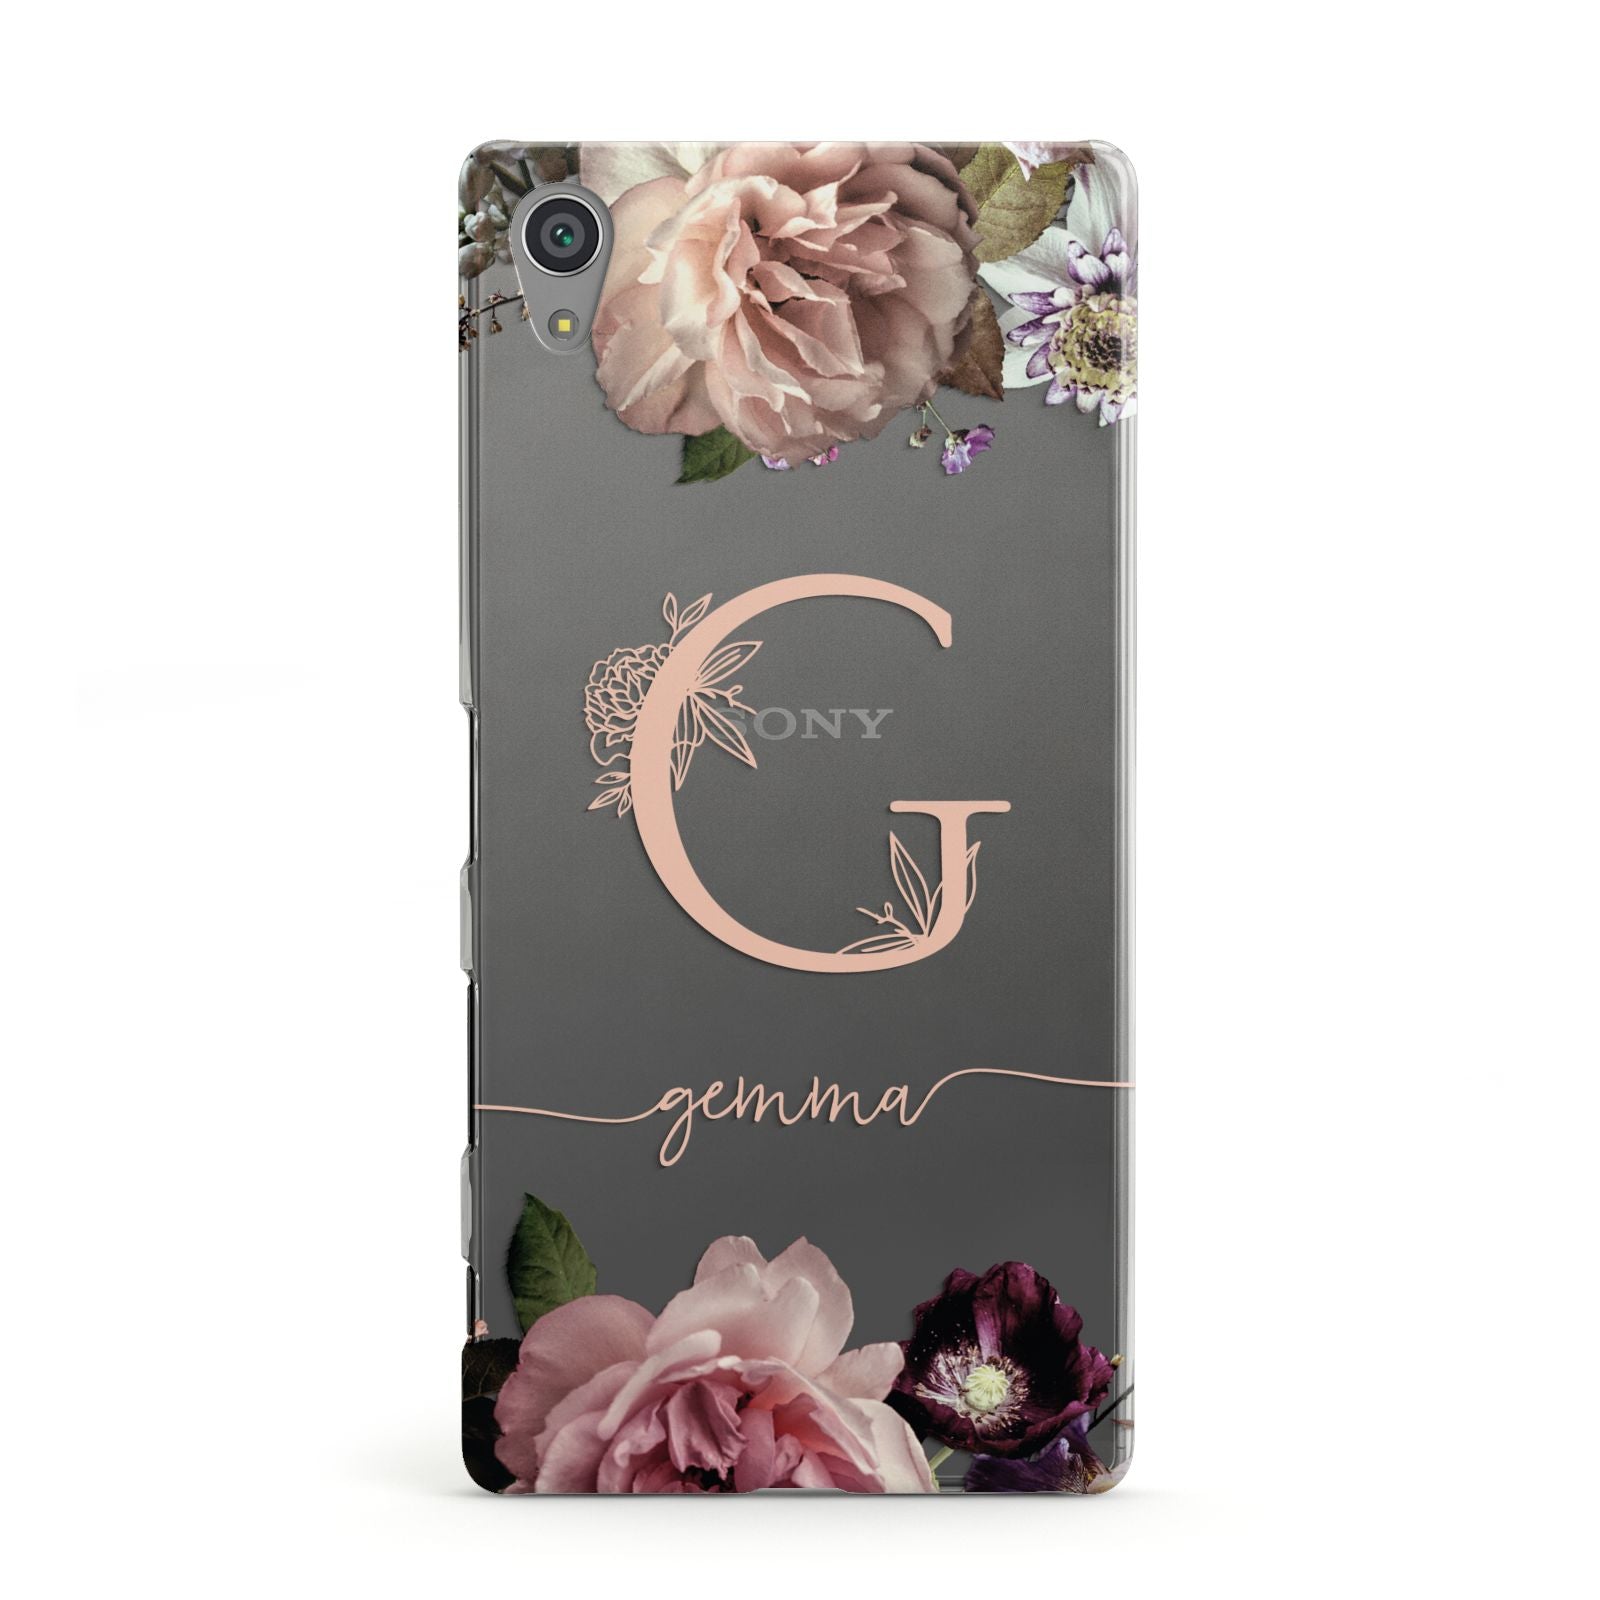 Vintage Floral Personalised Sony Xperia Case